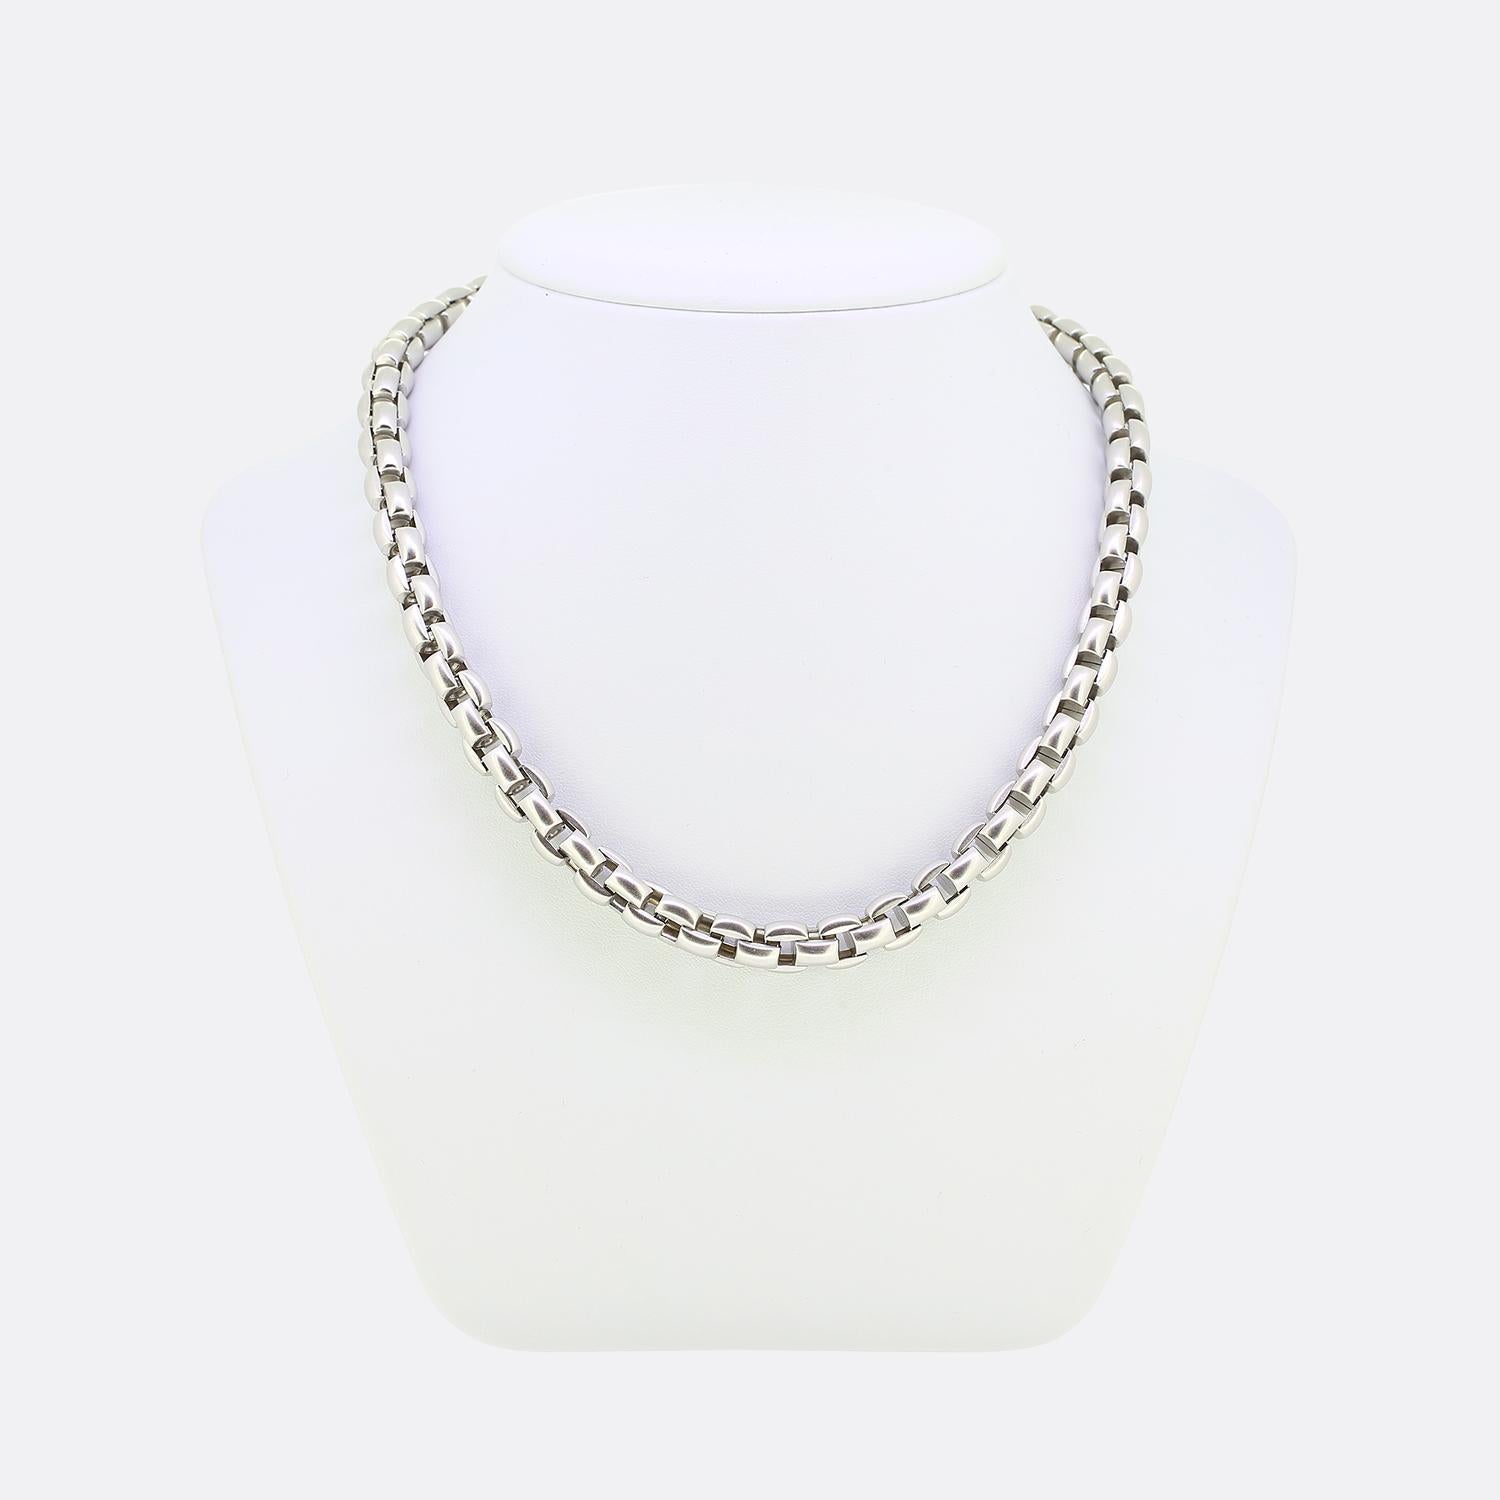 This is an 18ct white gold necklace from the luxury jewellery designer Fope. The necklace forms part of the Eka Collection is crafted in 18ct white gold, with a chunky, rope inspired linked chain. Unlike most Fope necklaces which have a polished